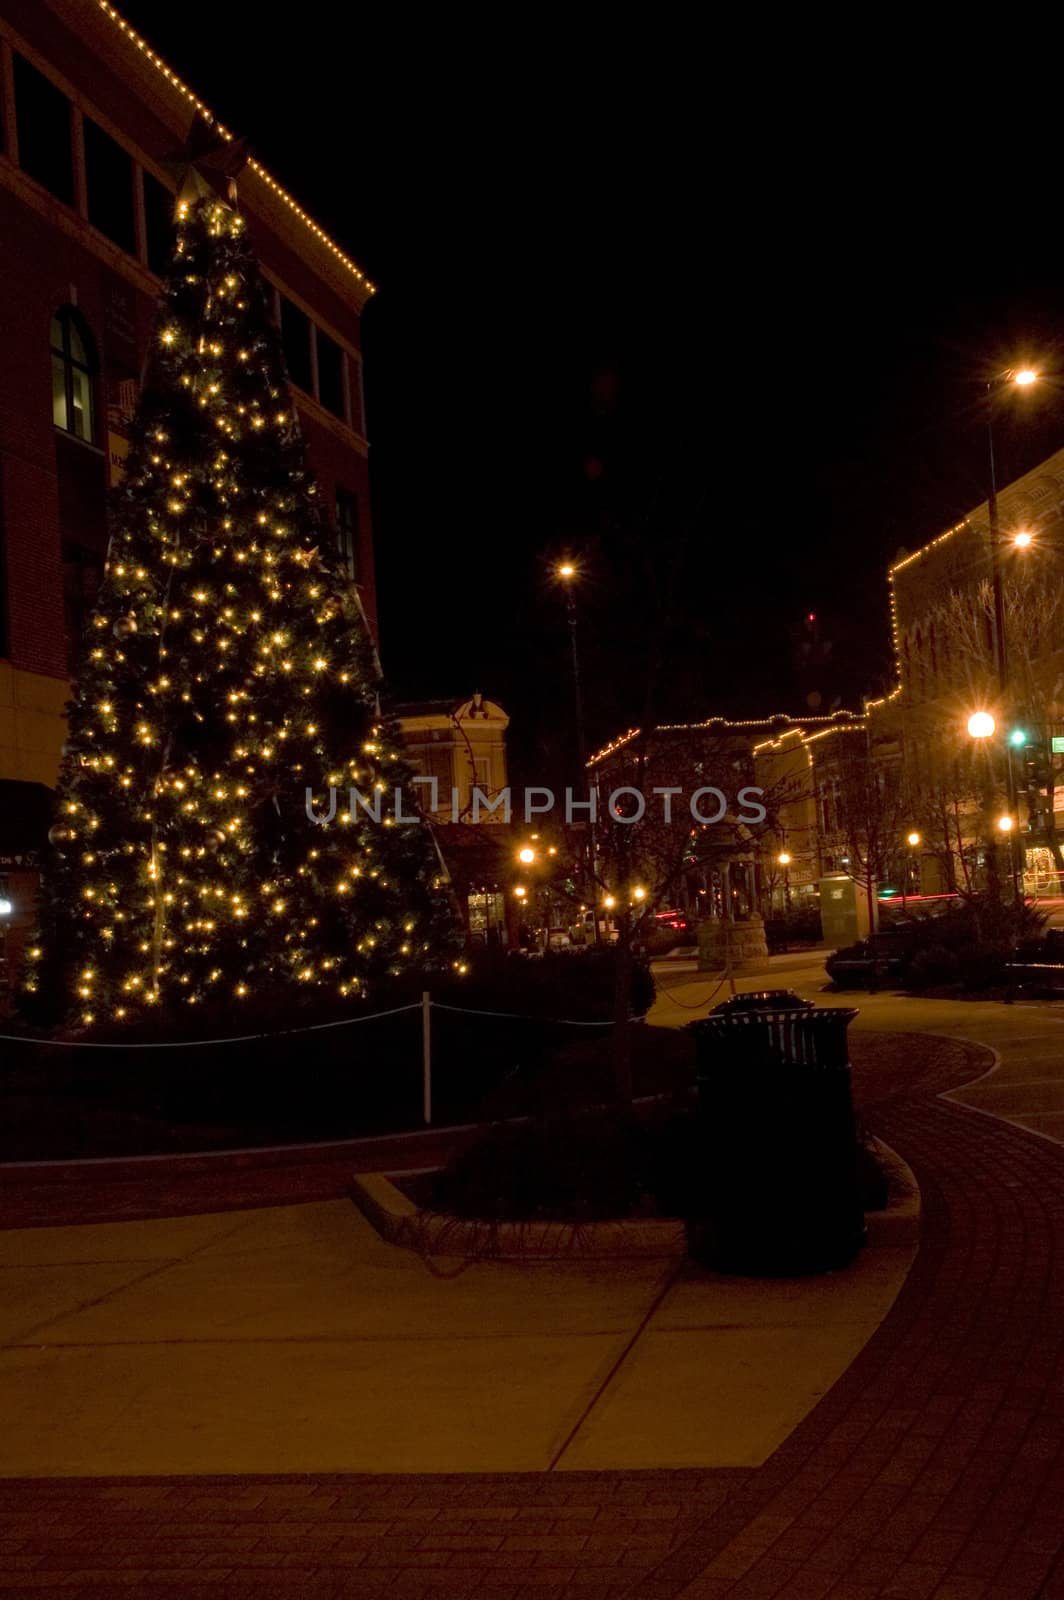 Downtown Champaign by eugenef